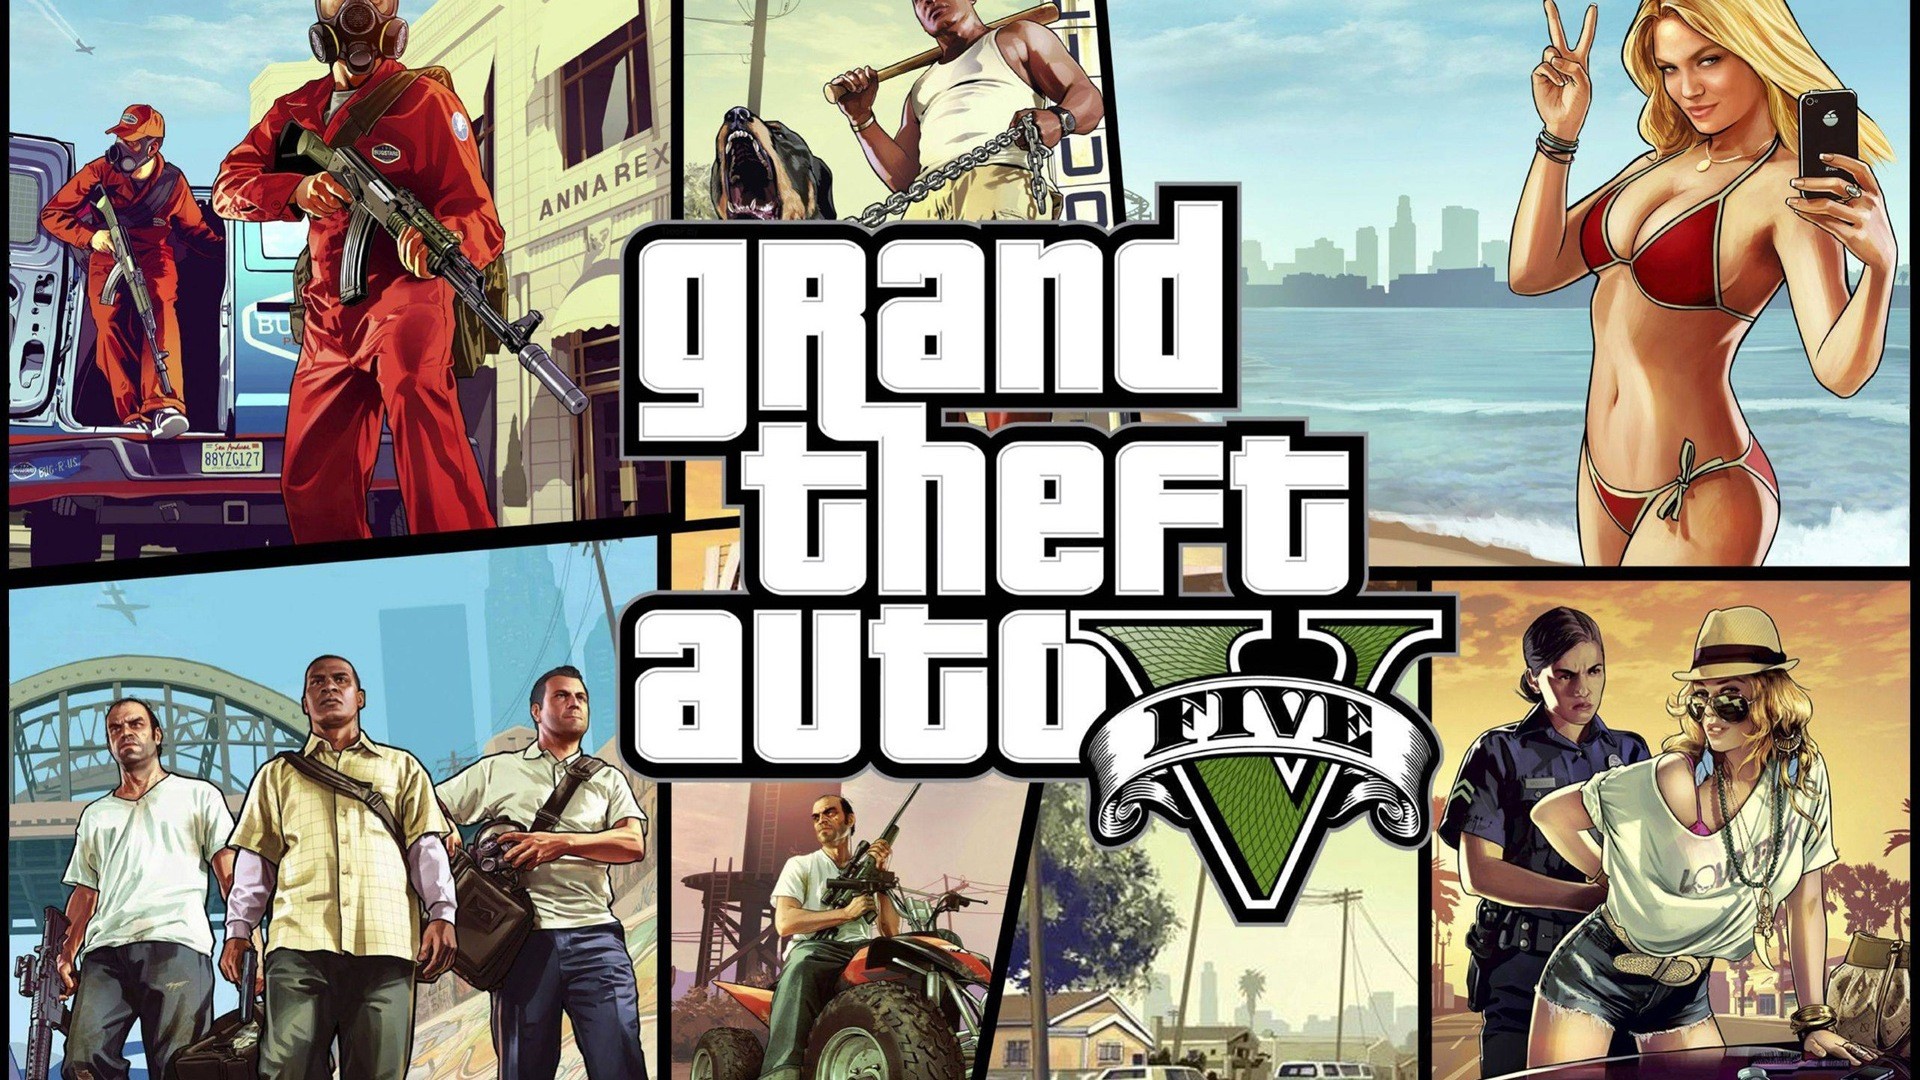 Gta 5 play for free now фото 82